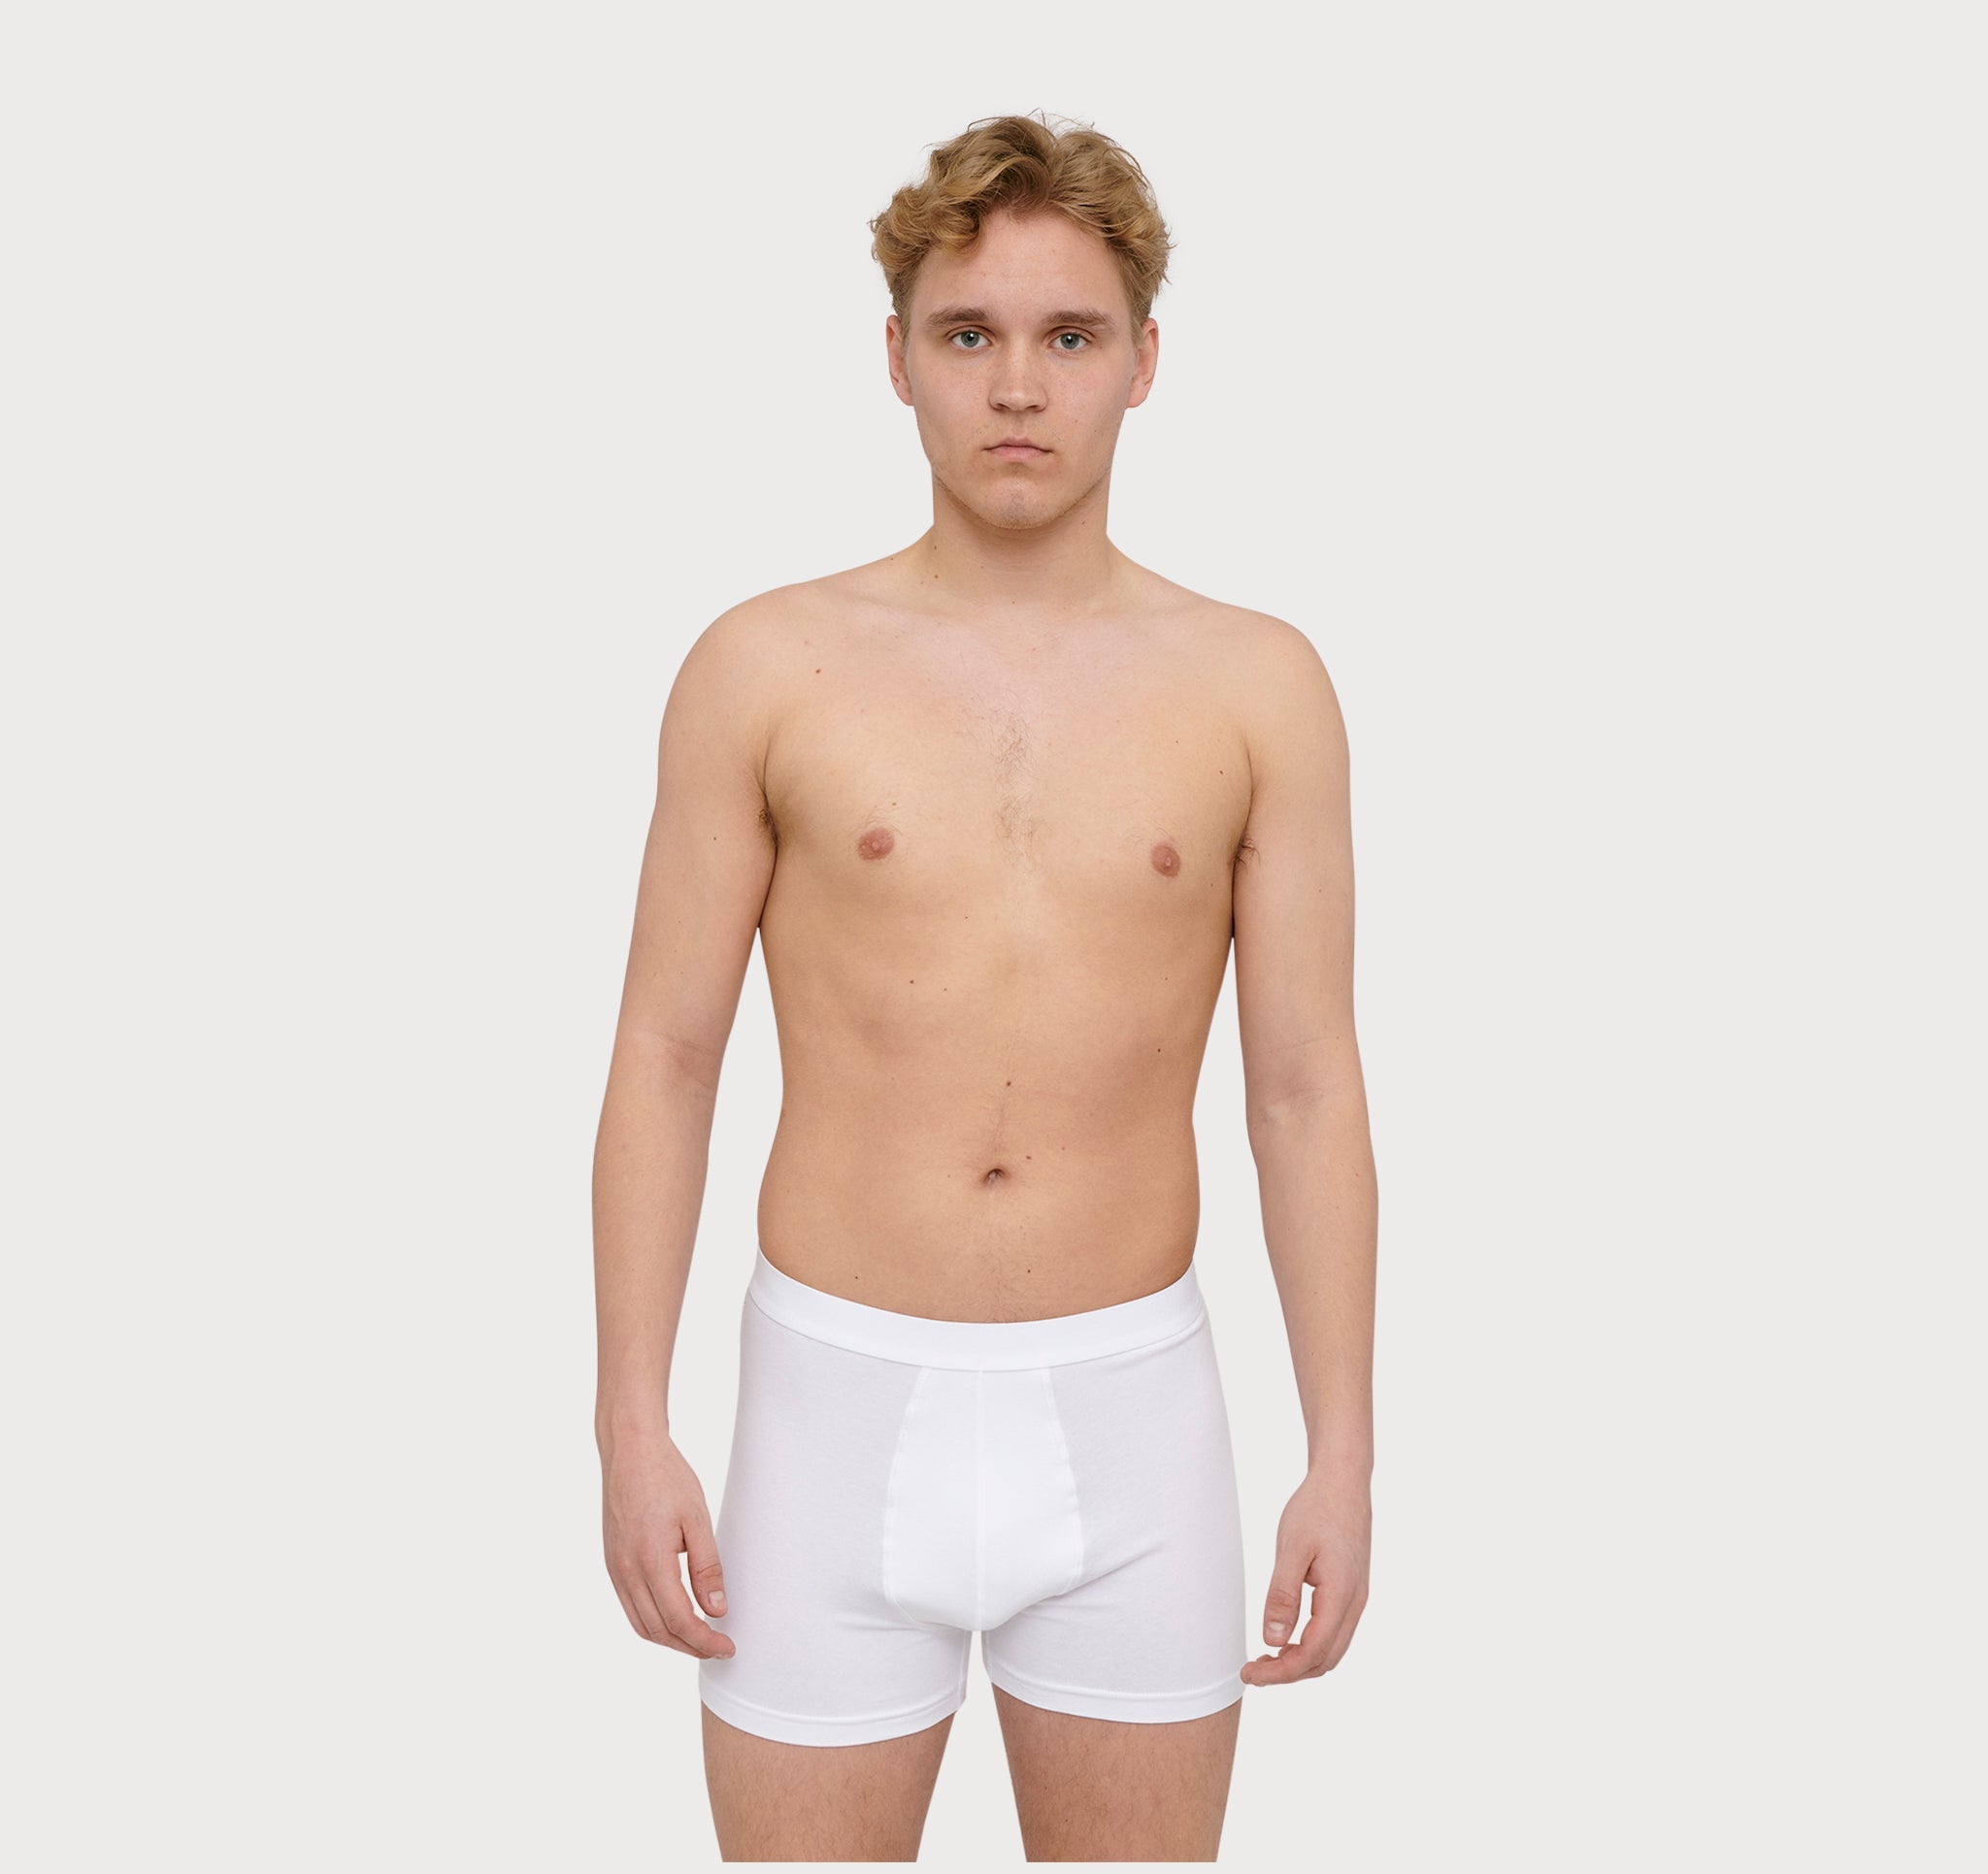 A-dam Boxer shorts to enjoy the ride. Made from organic cotton.